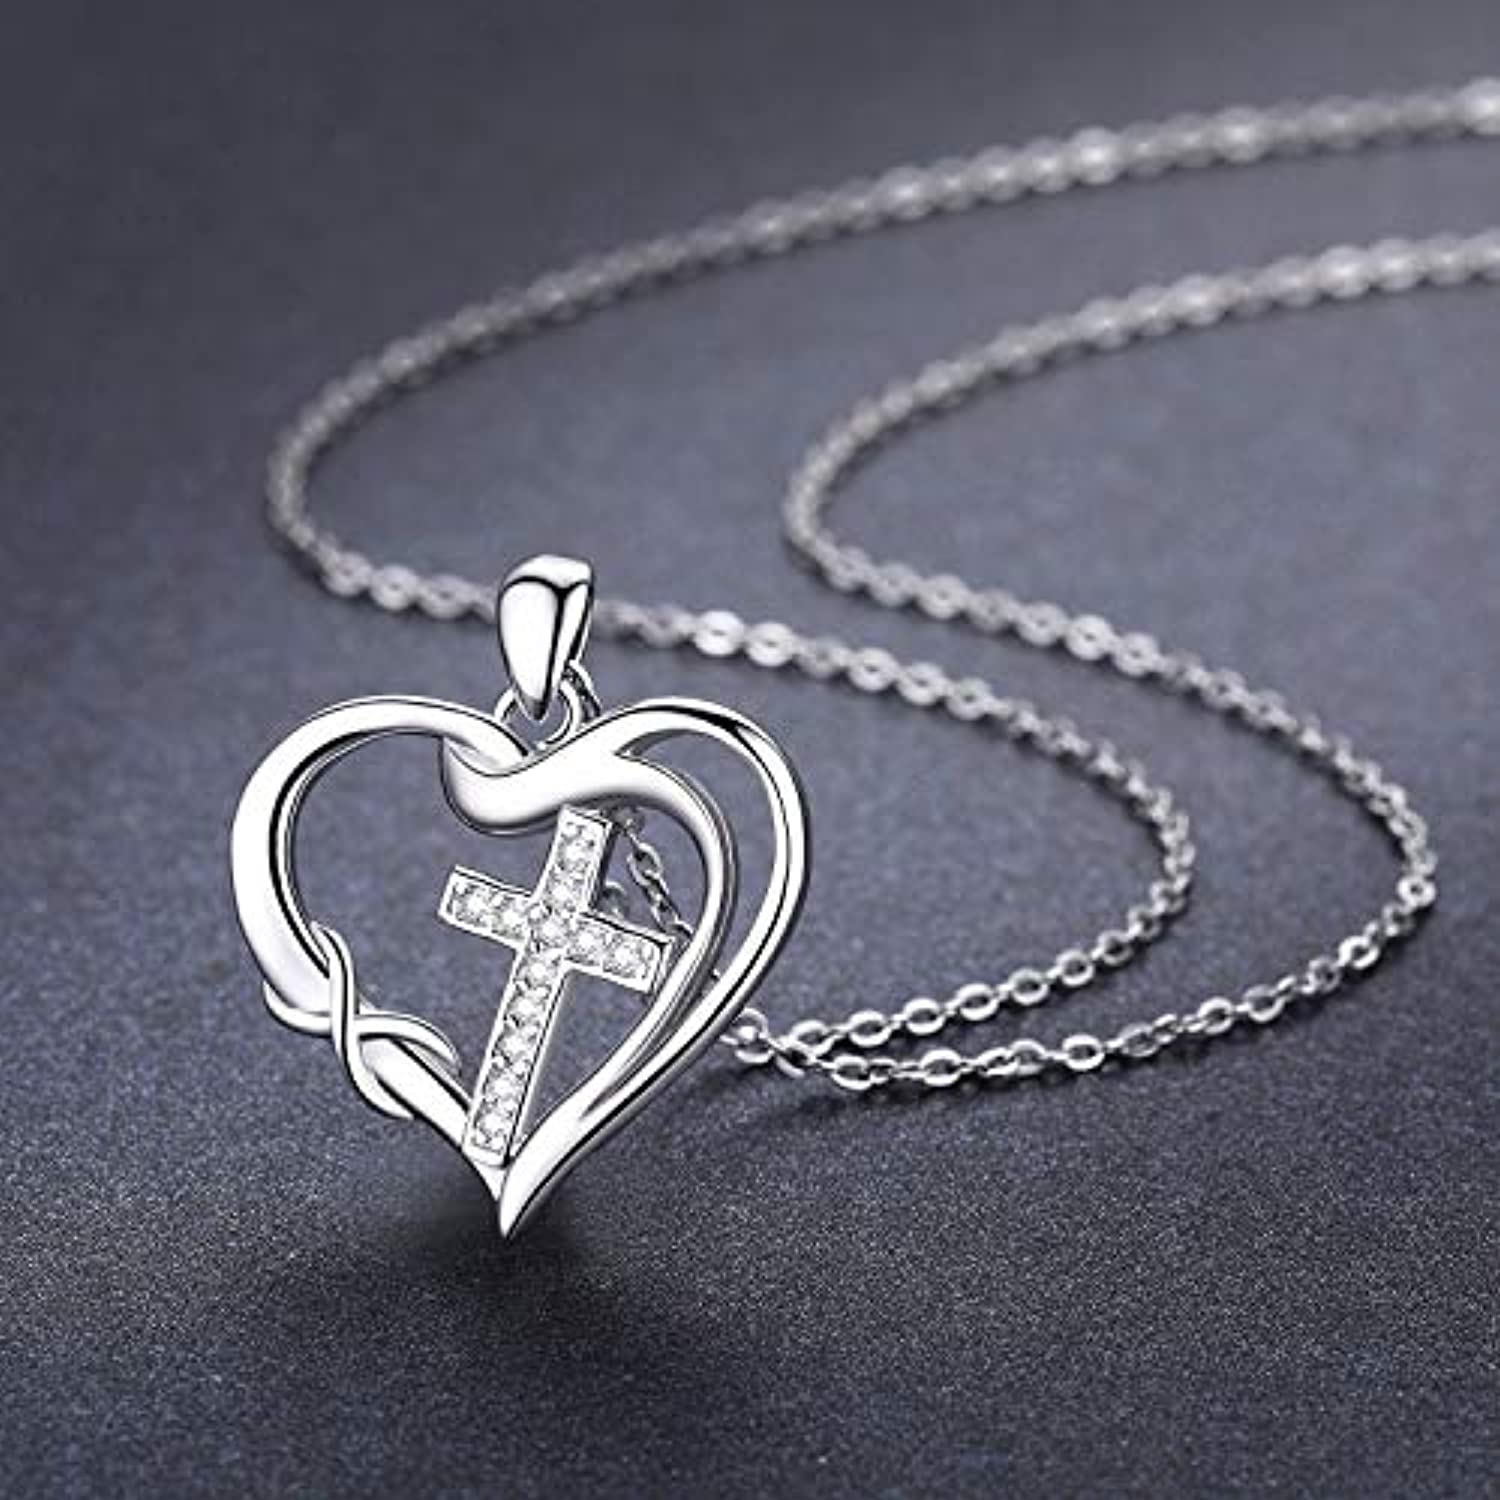 925 Sterling Silver Cross Necklace Love Heart Infinity Pendant Necklace with Dainty Chain 18’’ Jewelry Gift for Women